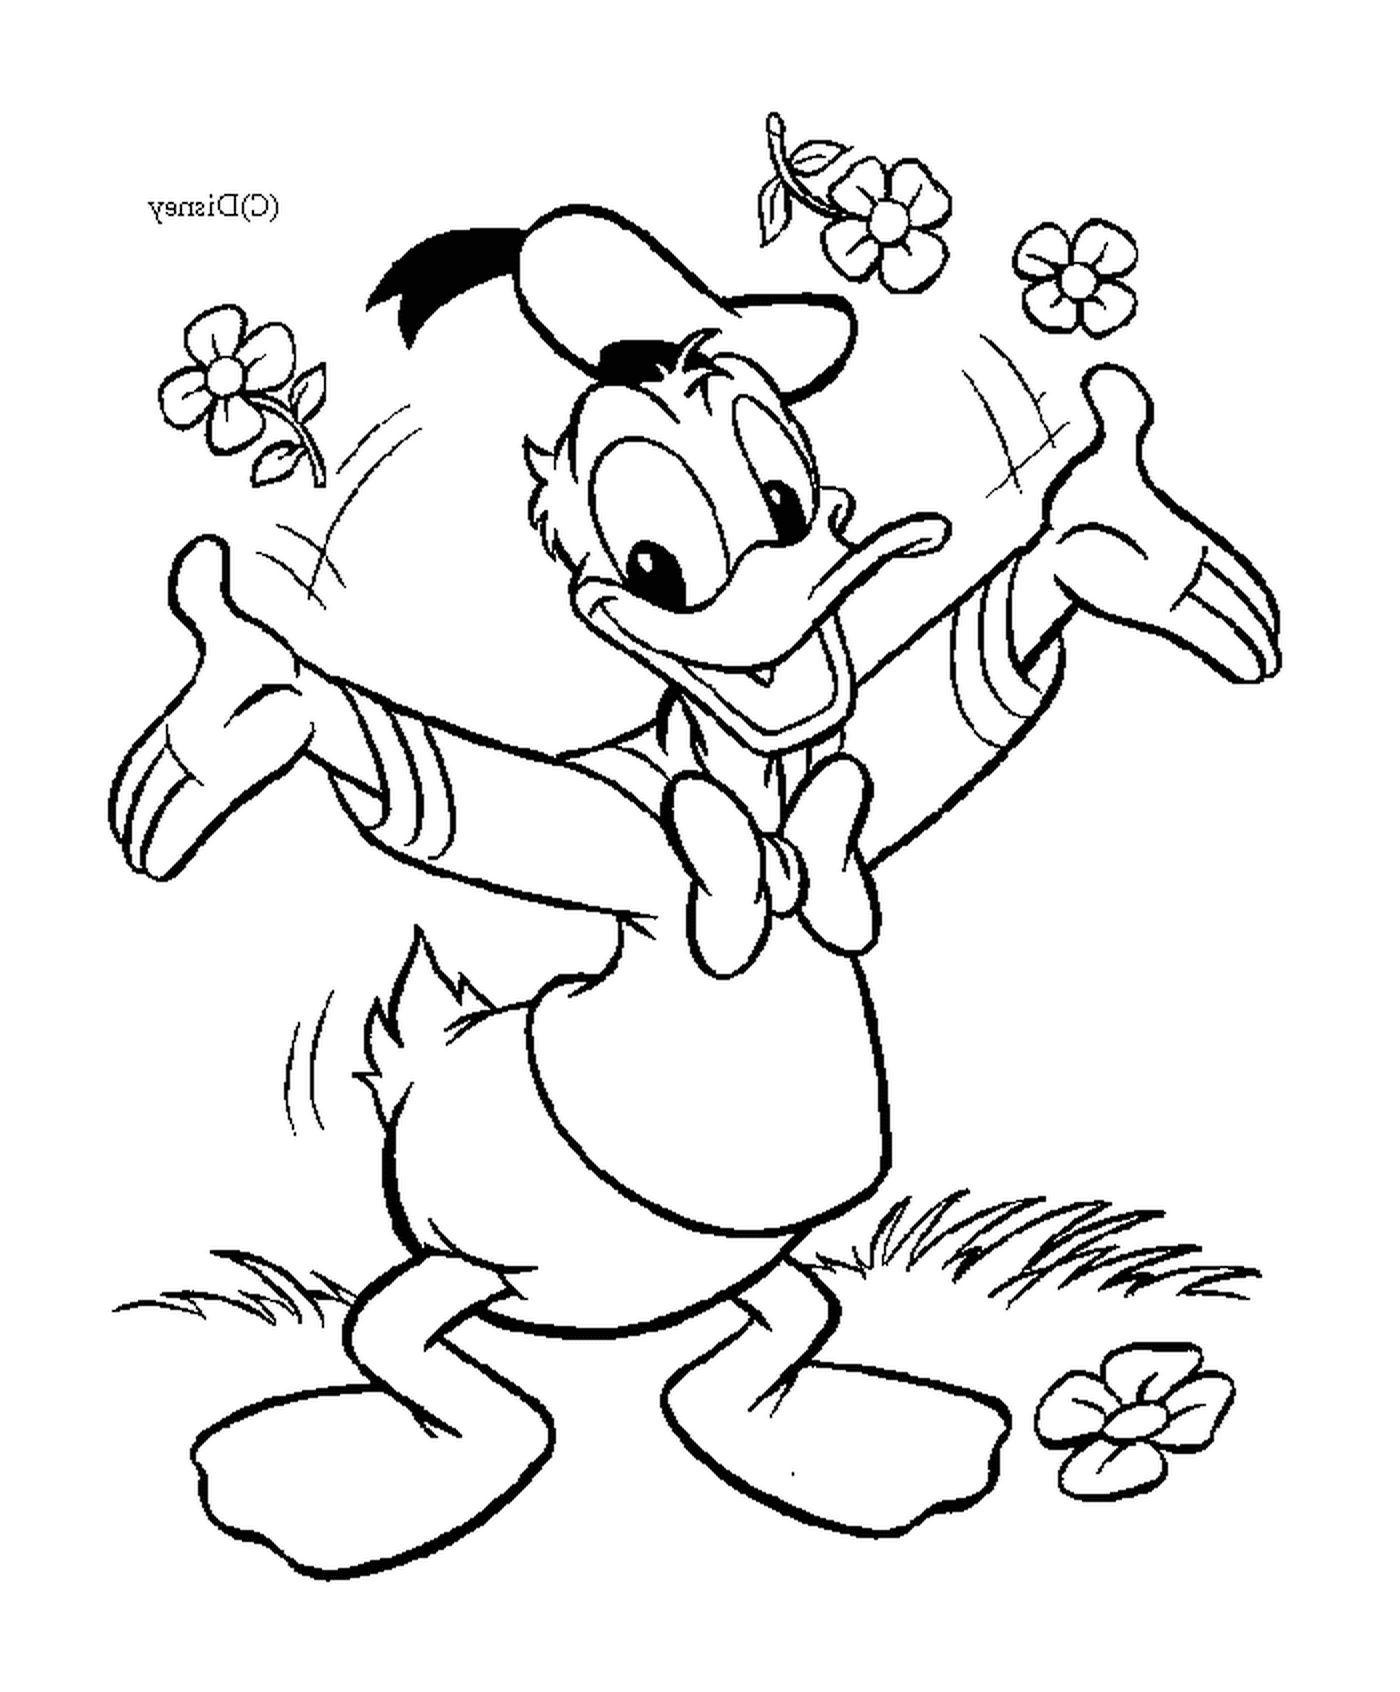  Donald offers flowers with affection 